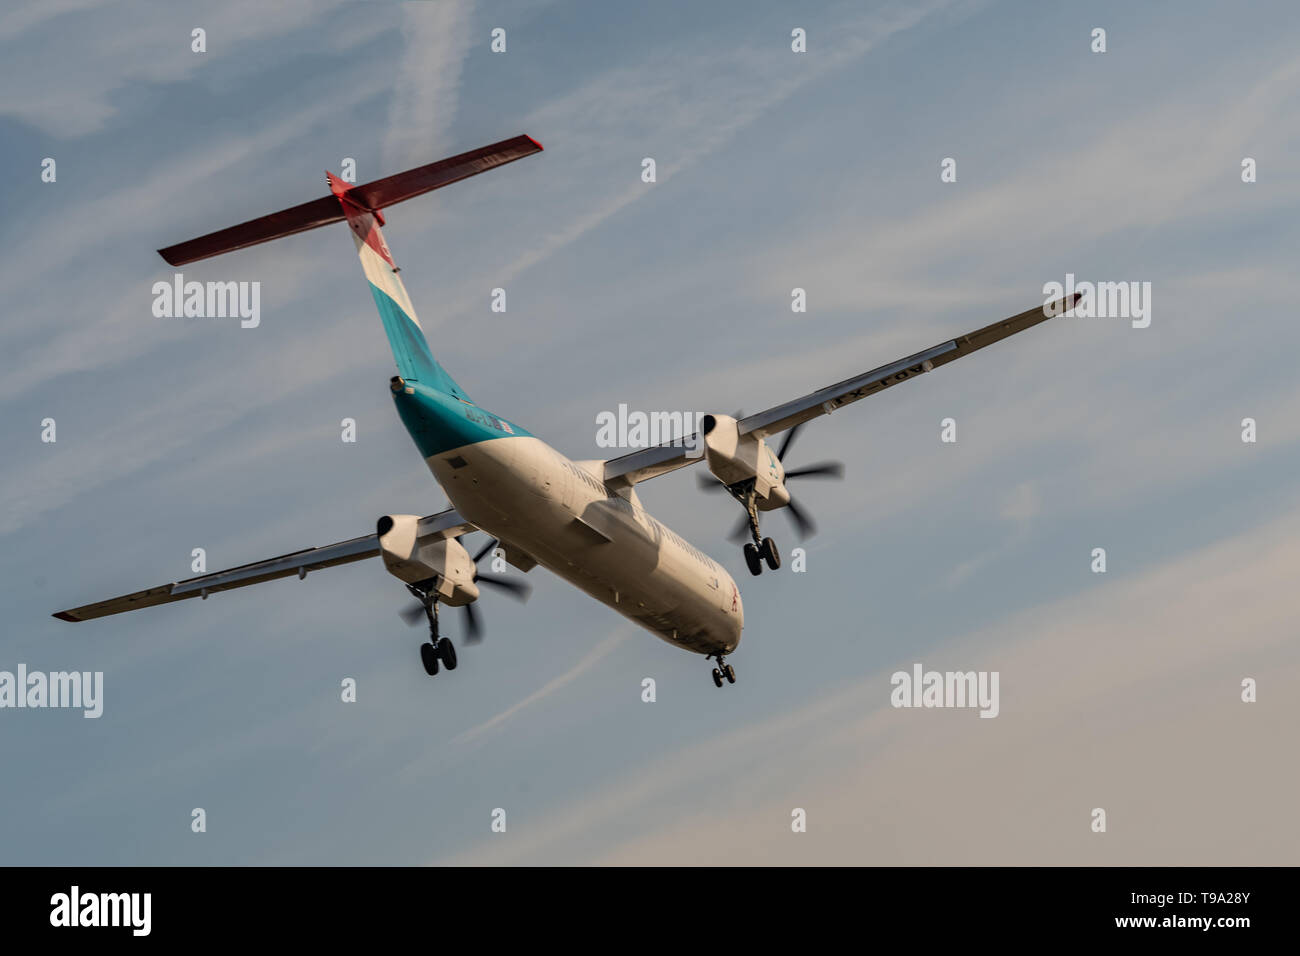 London, UK - 17, February 2019: Luxair a Luxembourg regional airline based in Luxembourg, aircraft type De Havilland Canada DHC-8-400 Fly on blue sky  Stock Photo